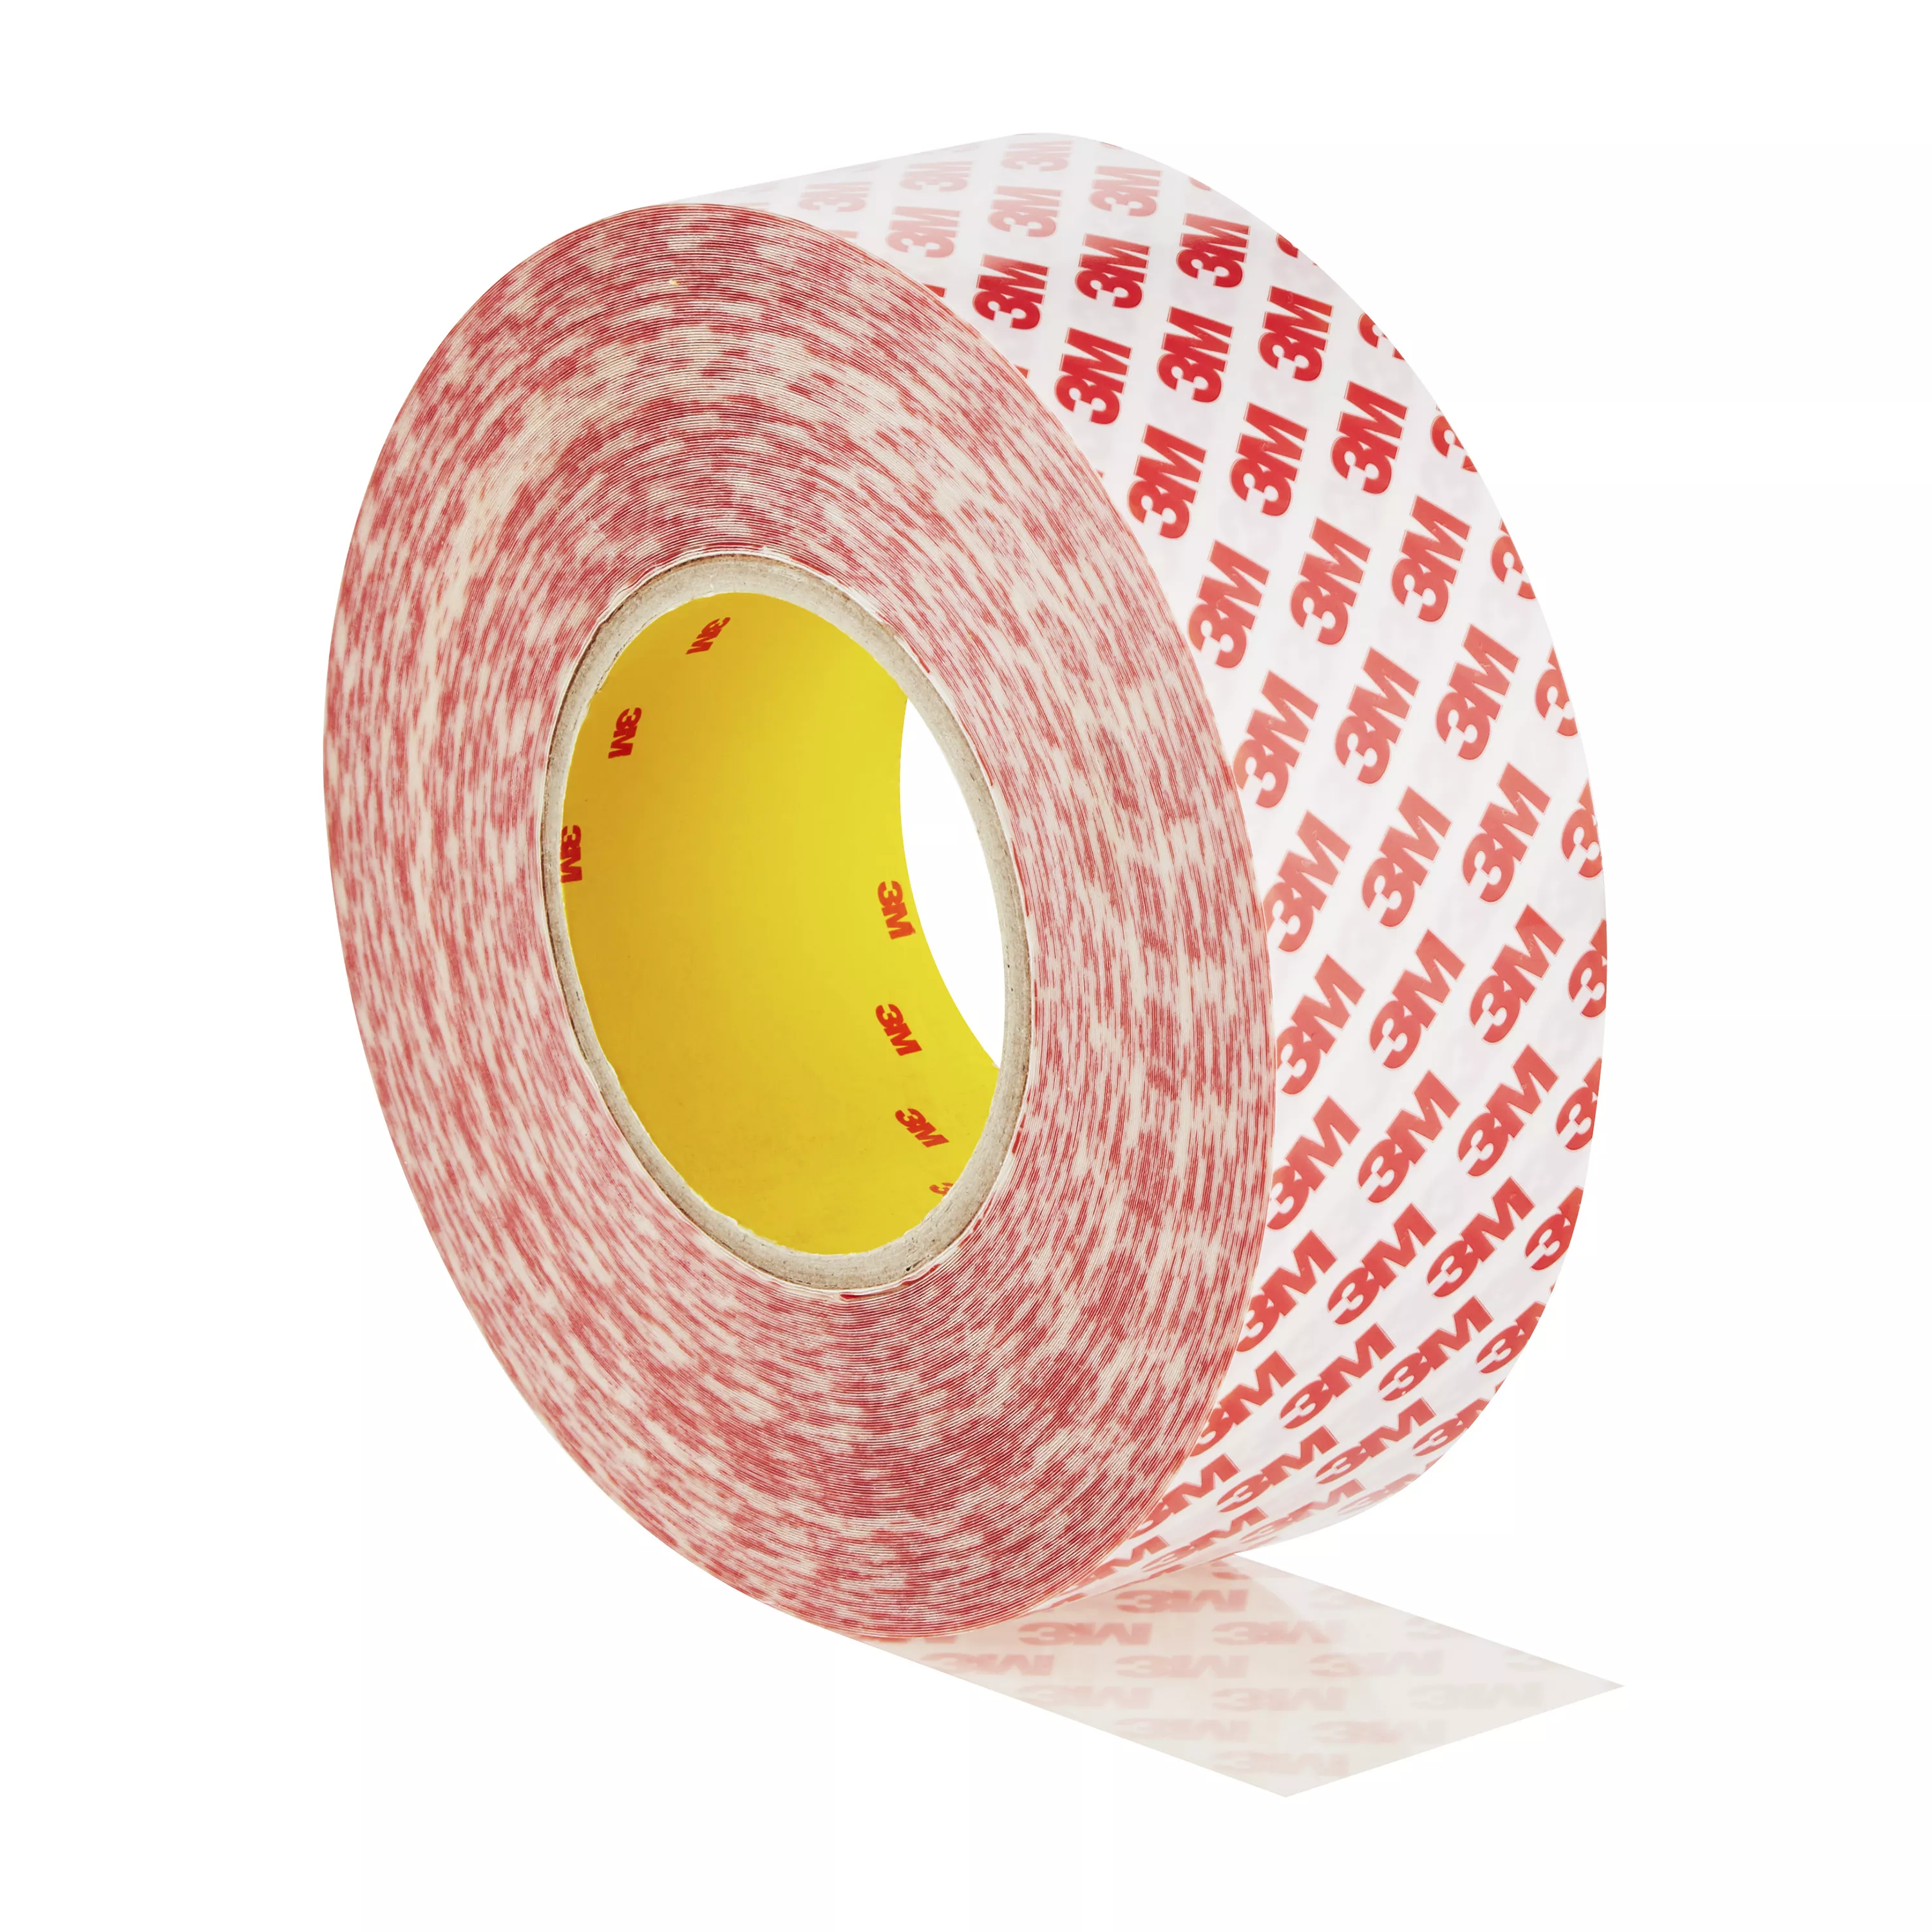 3M™ Double Coated Tape GPT-020F, Transparent, Level Wound, 9 mm x 3850 m, 1 Roll/Case